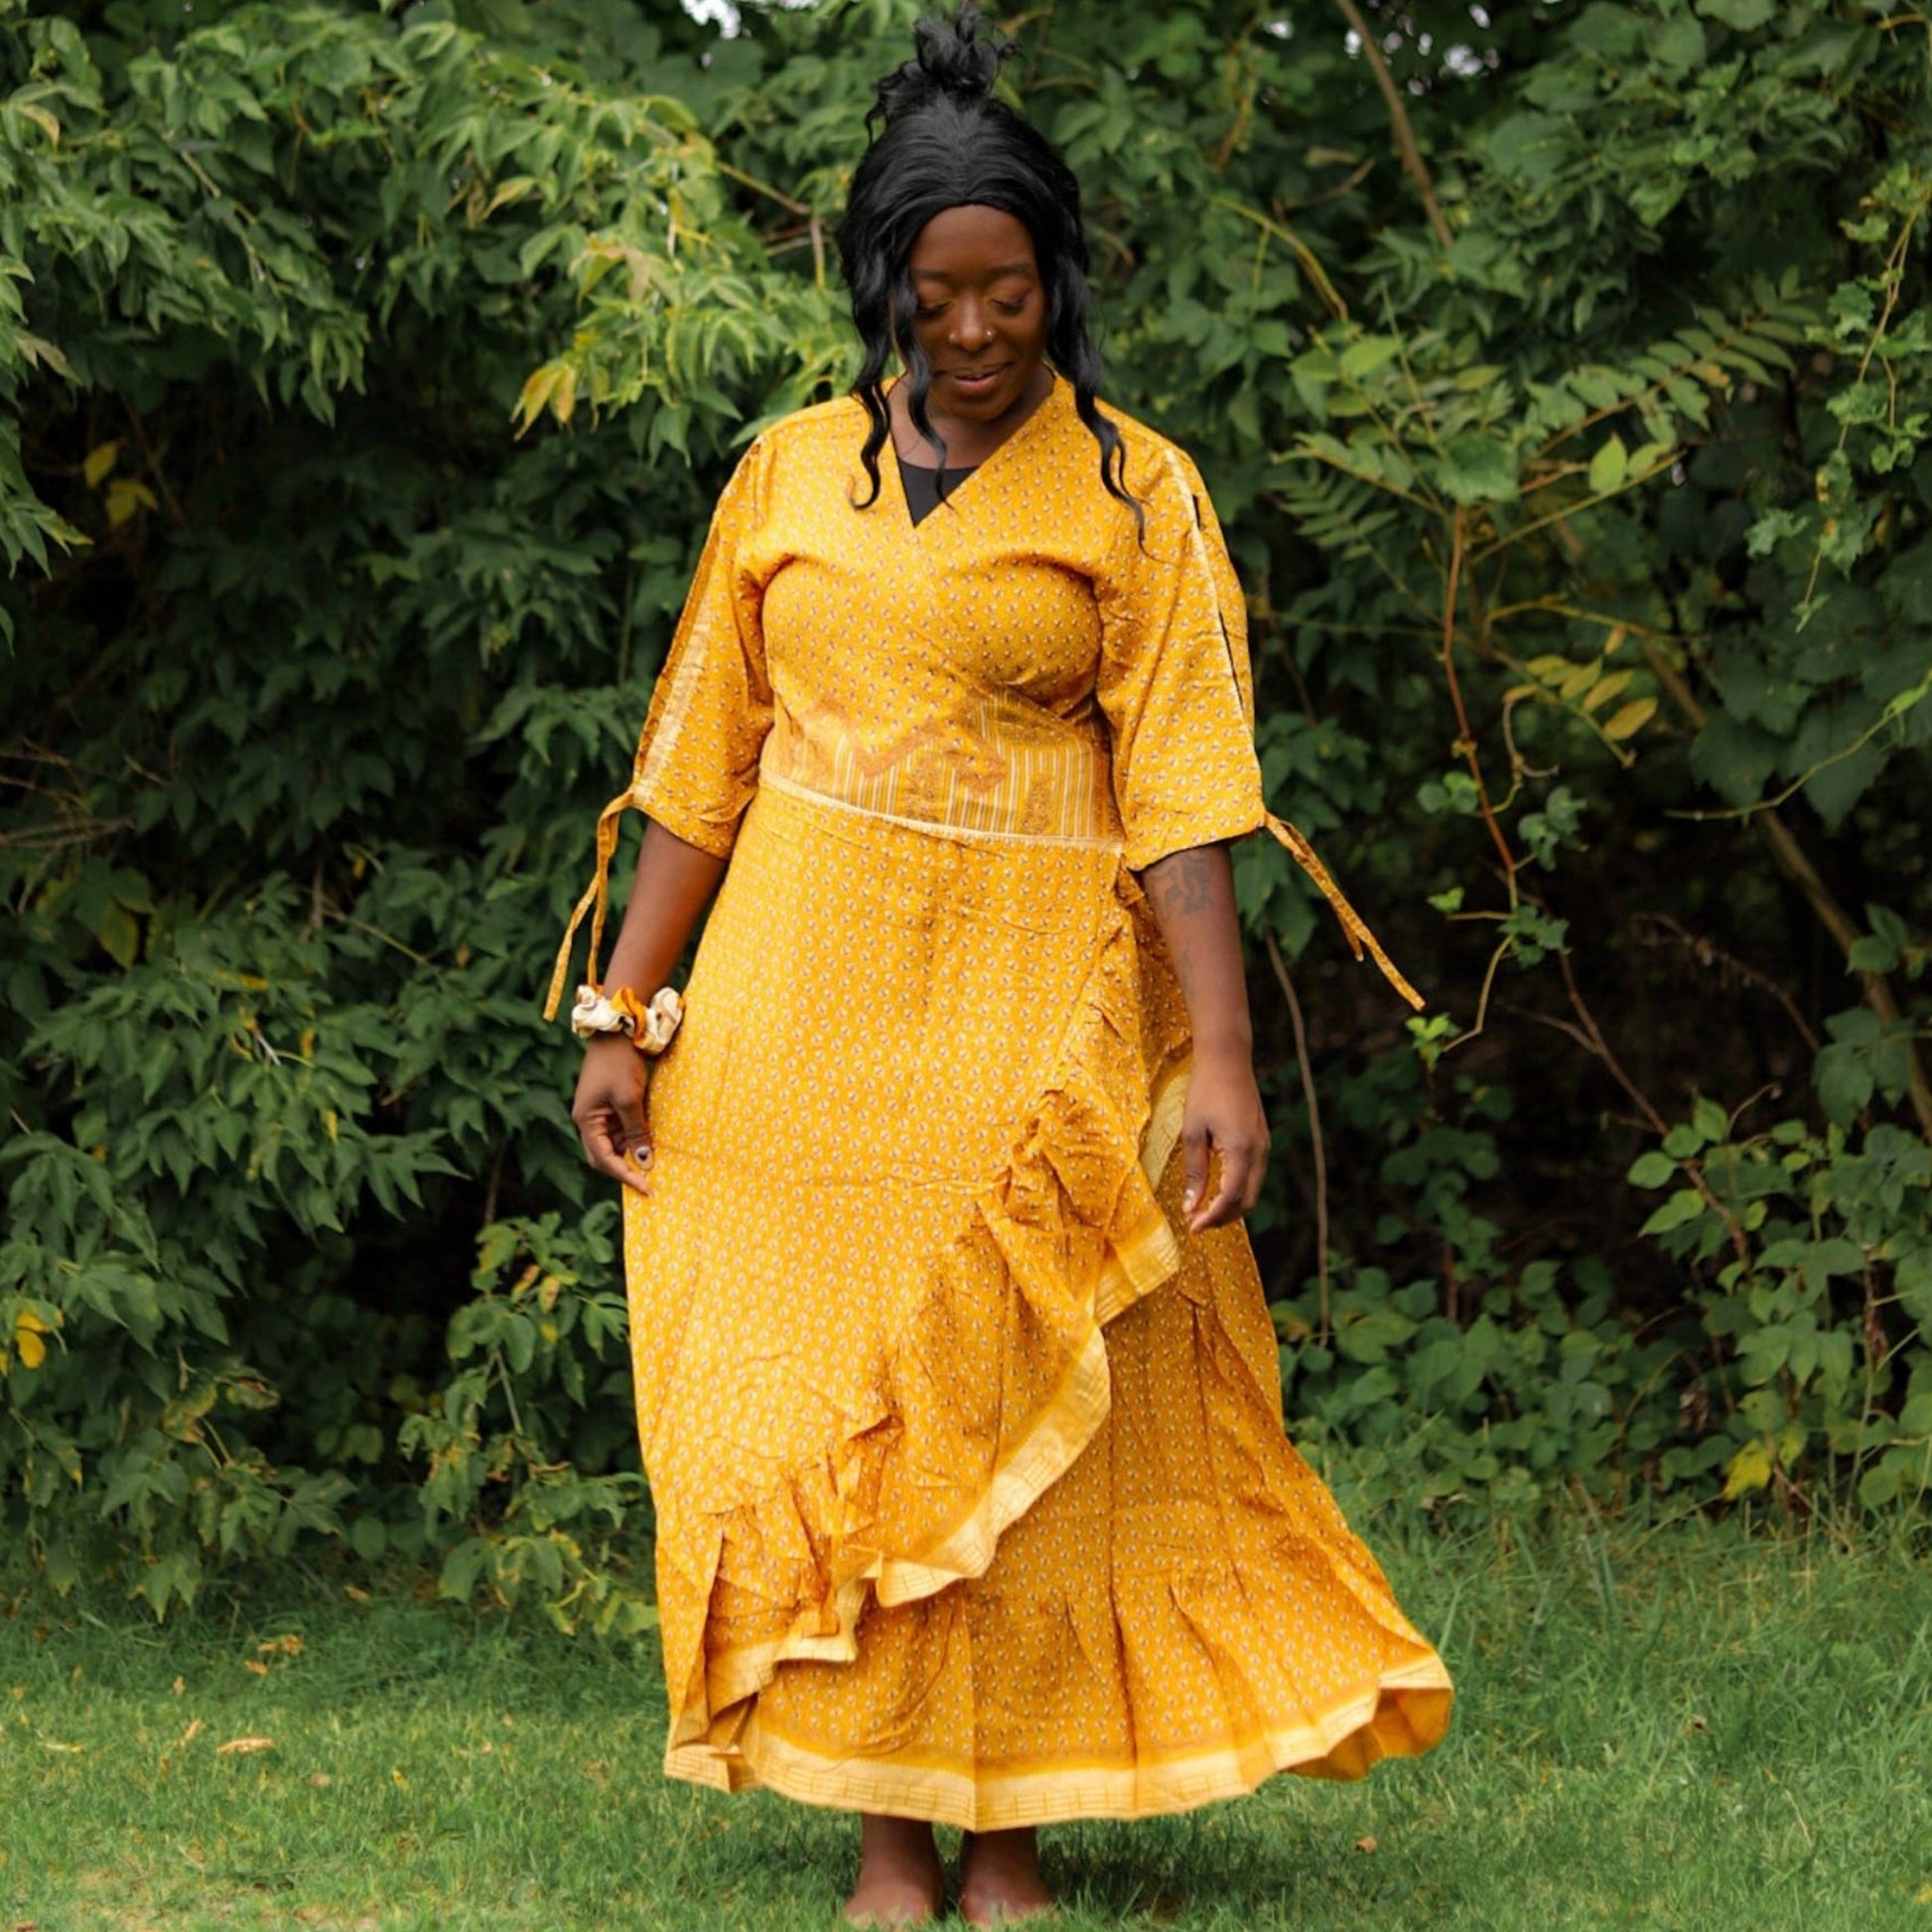 A Model standing in a forest wearing a Bright Yellow Zaria Wrap Dress. The Model is holding out the sides to show how flowy the fabric is.